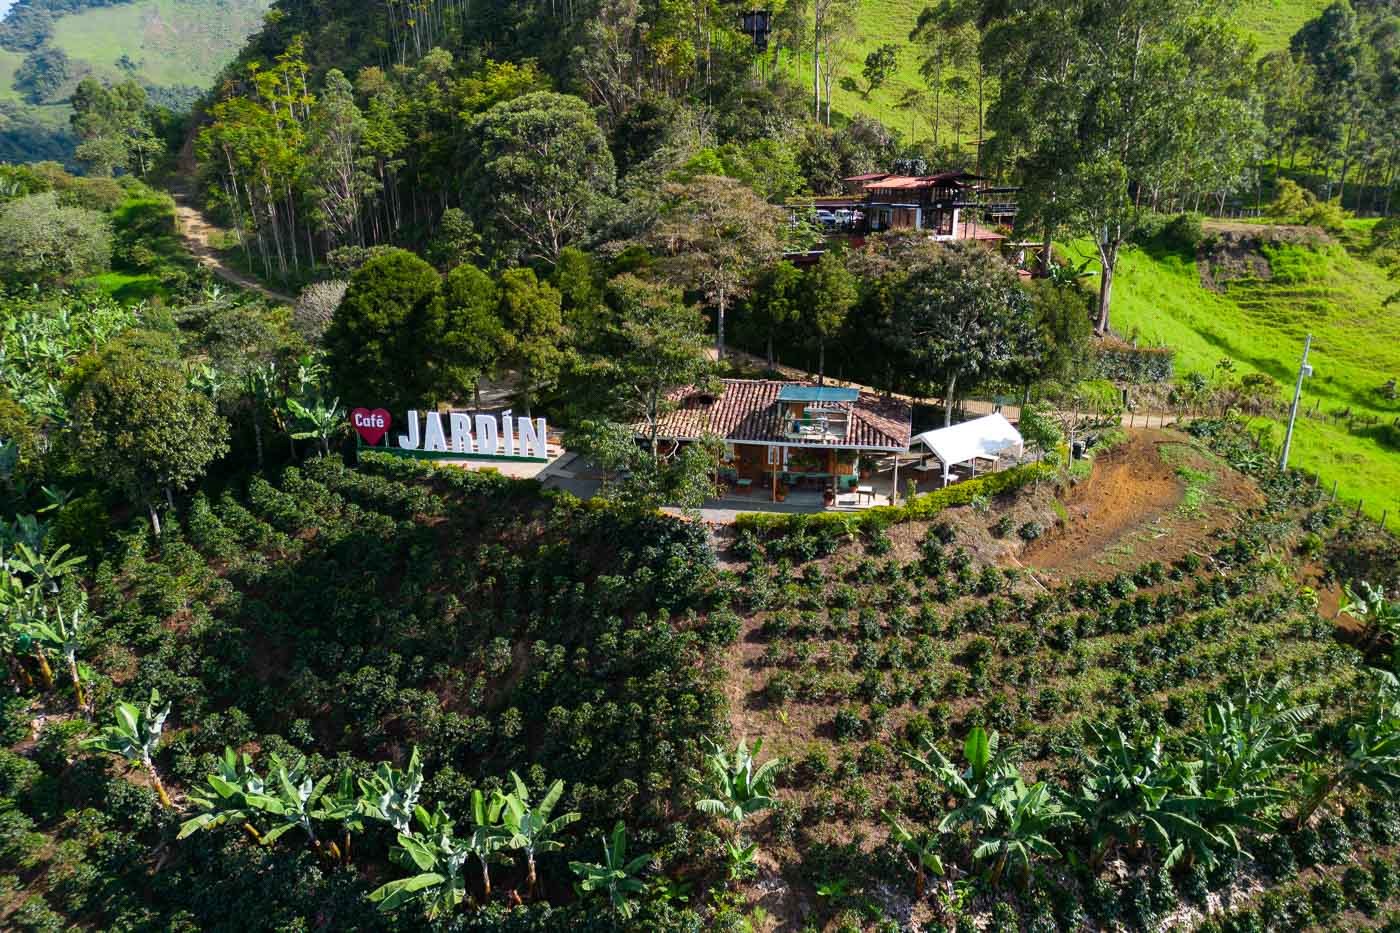 An aerial view of the Café Jardín building and sign on the top of a hill surrounded by trees and bushes.